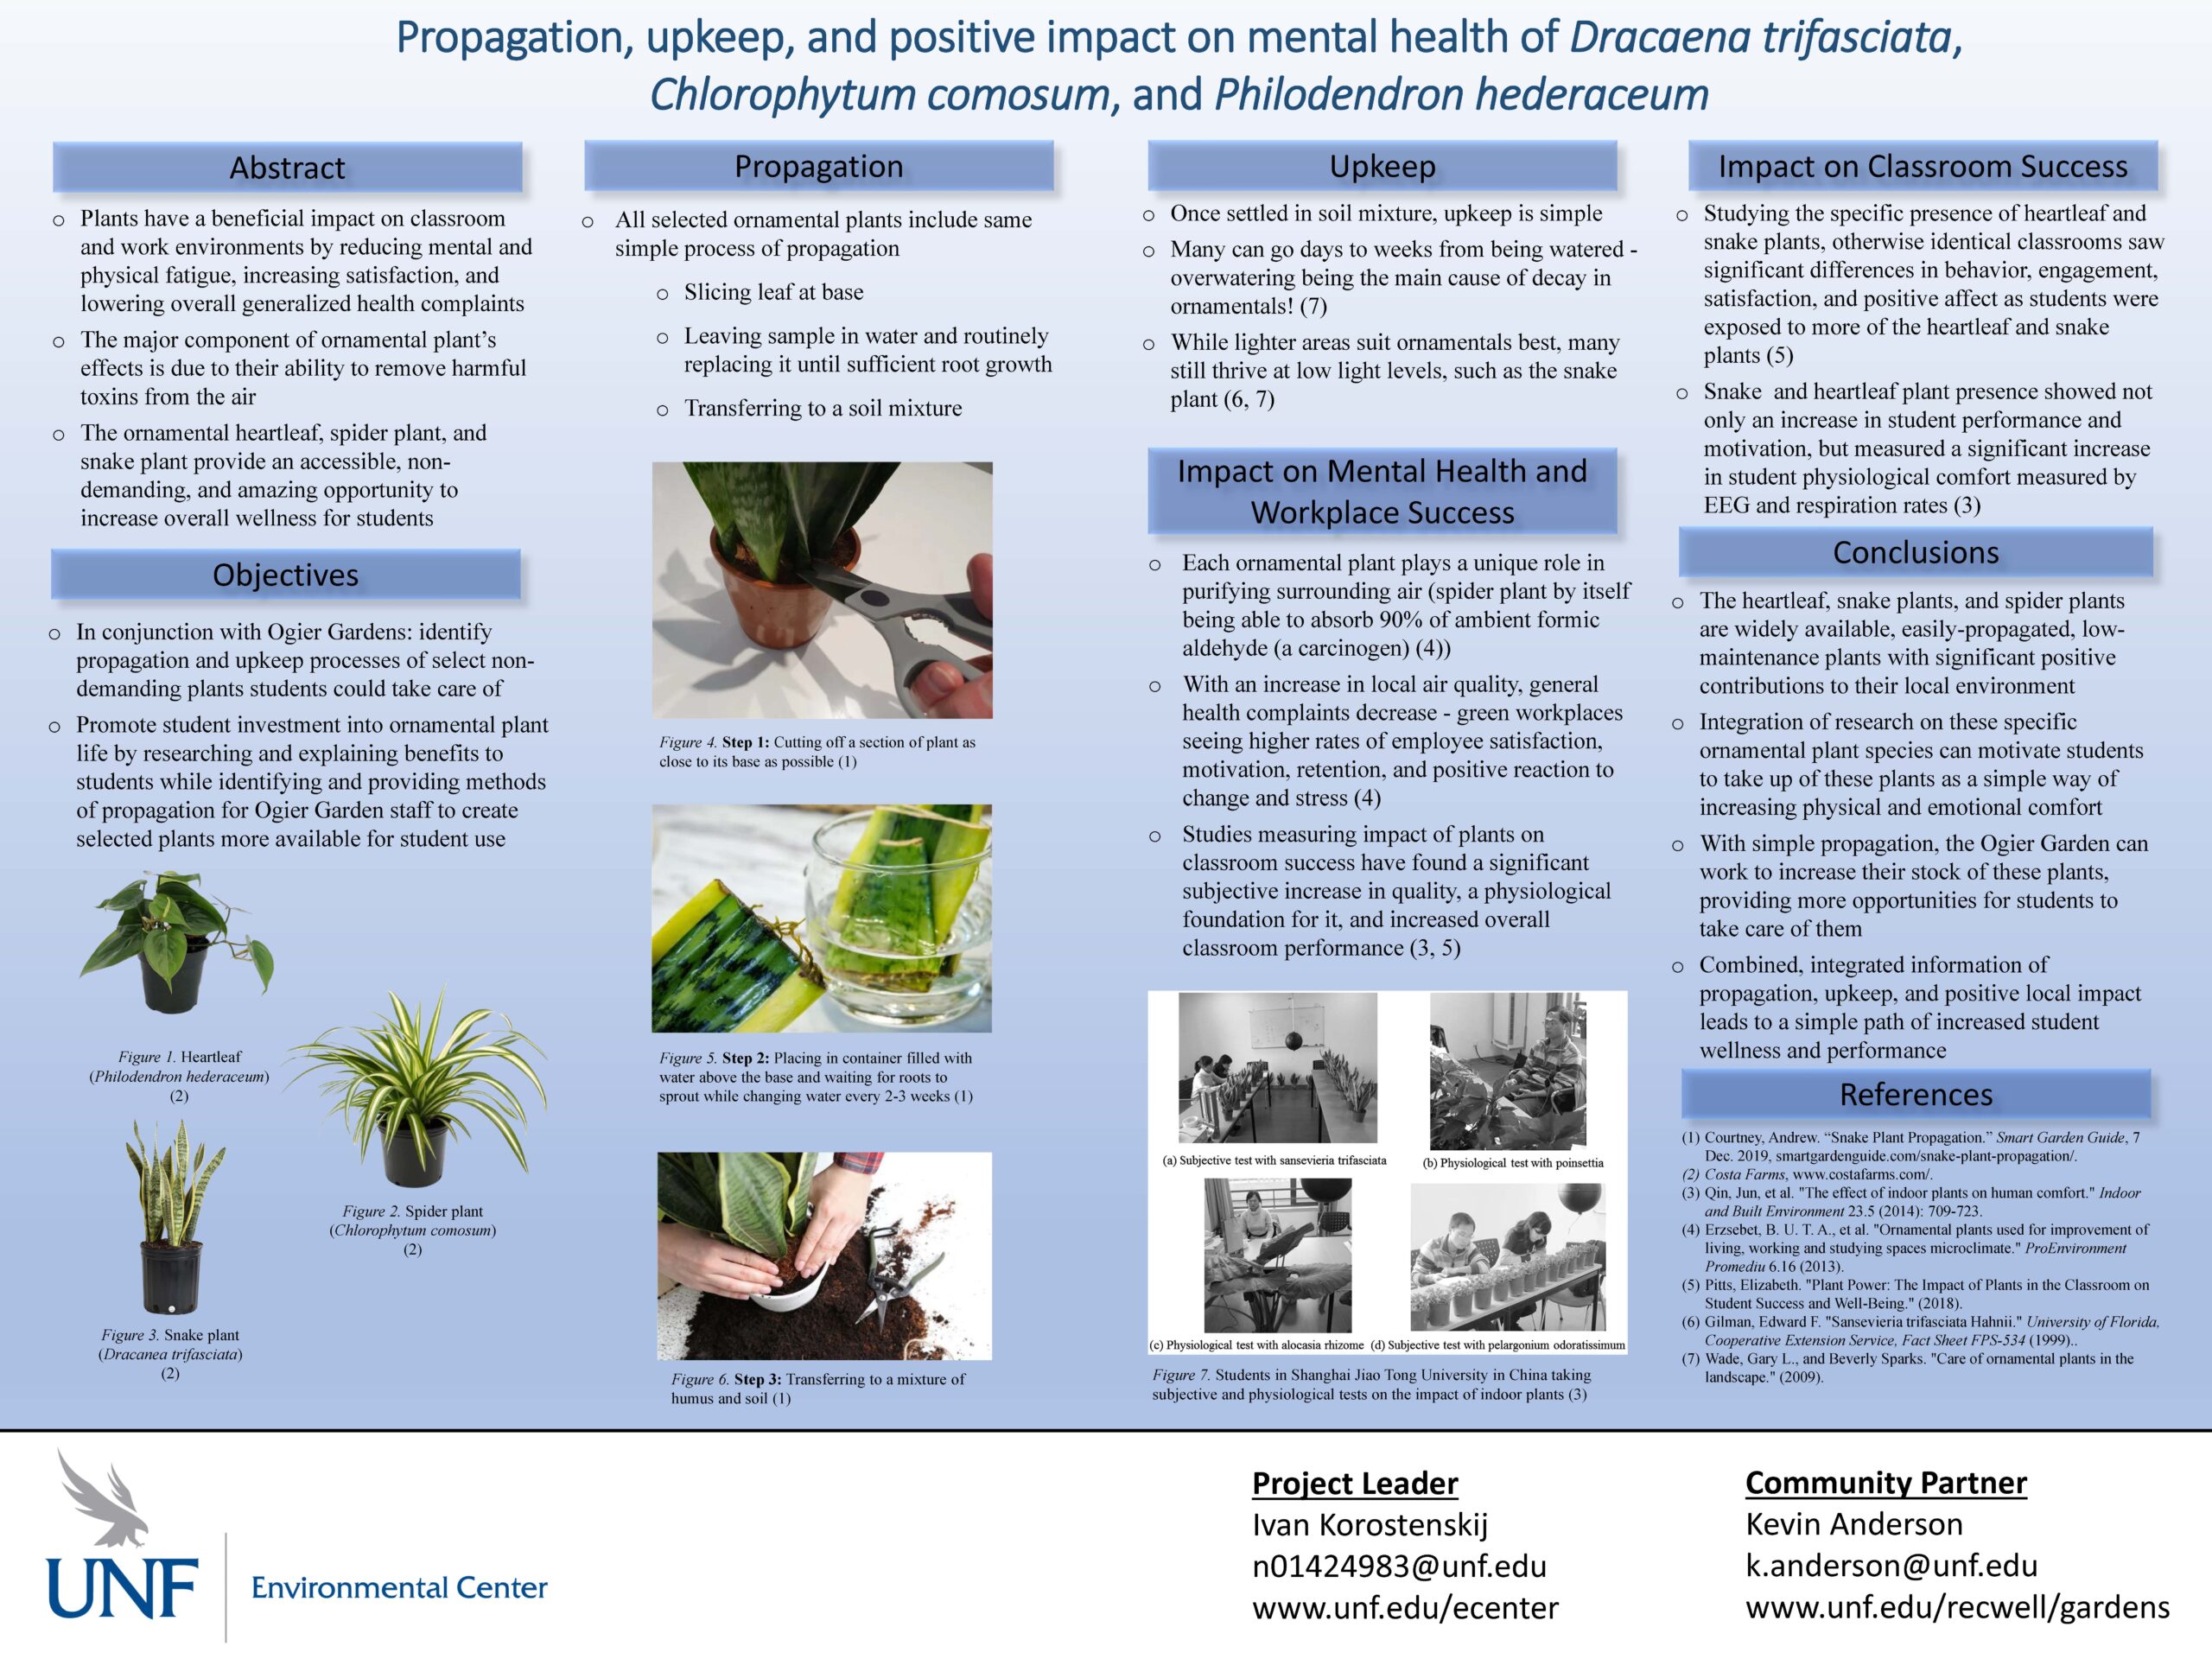 Propagation, upkeep, and positive impact on mental health of Dracaena trifasciata, Chlorophytum comosum, and Philodendron hederaceum